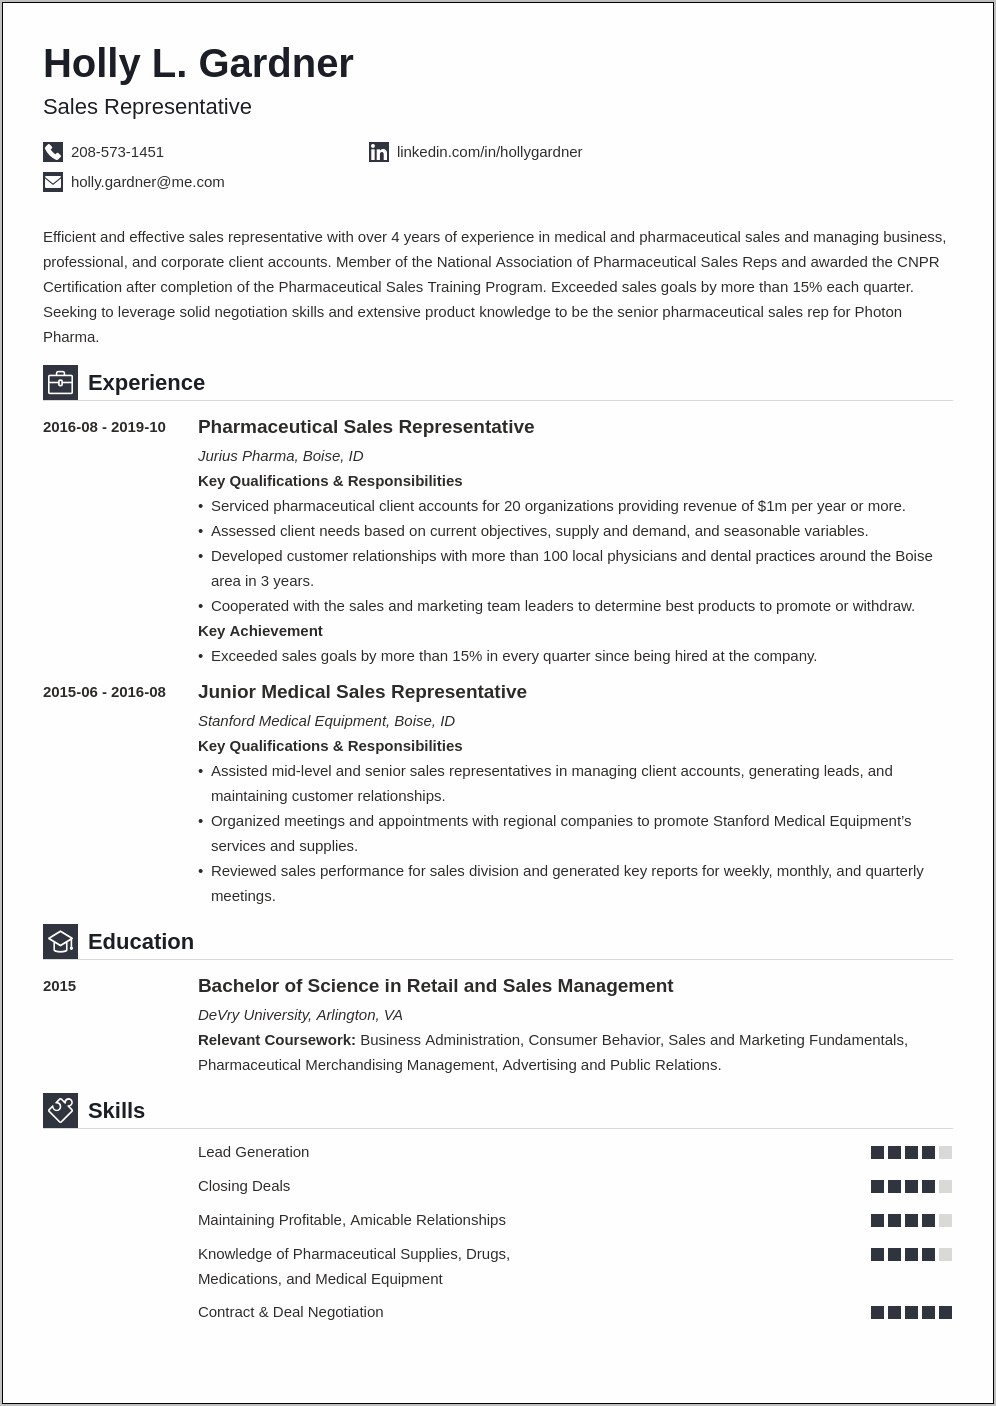 Real Estate Sales Agent Resume No Experience